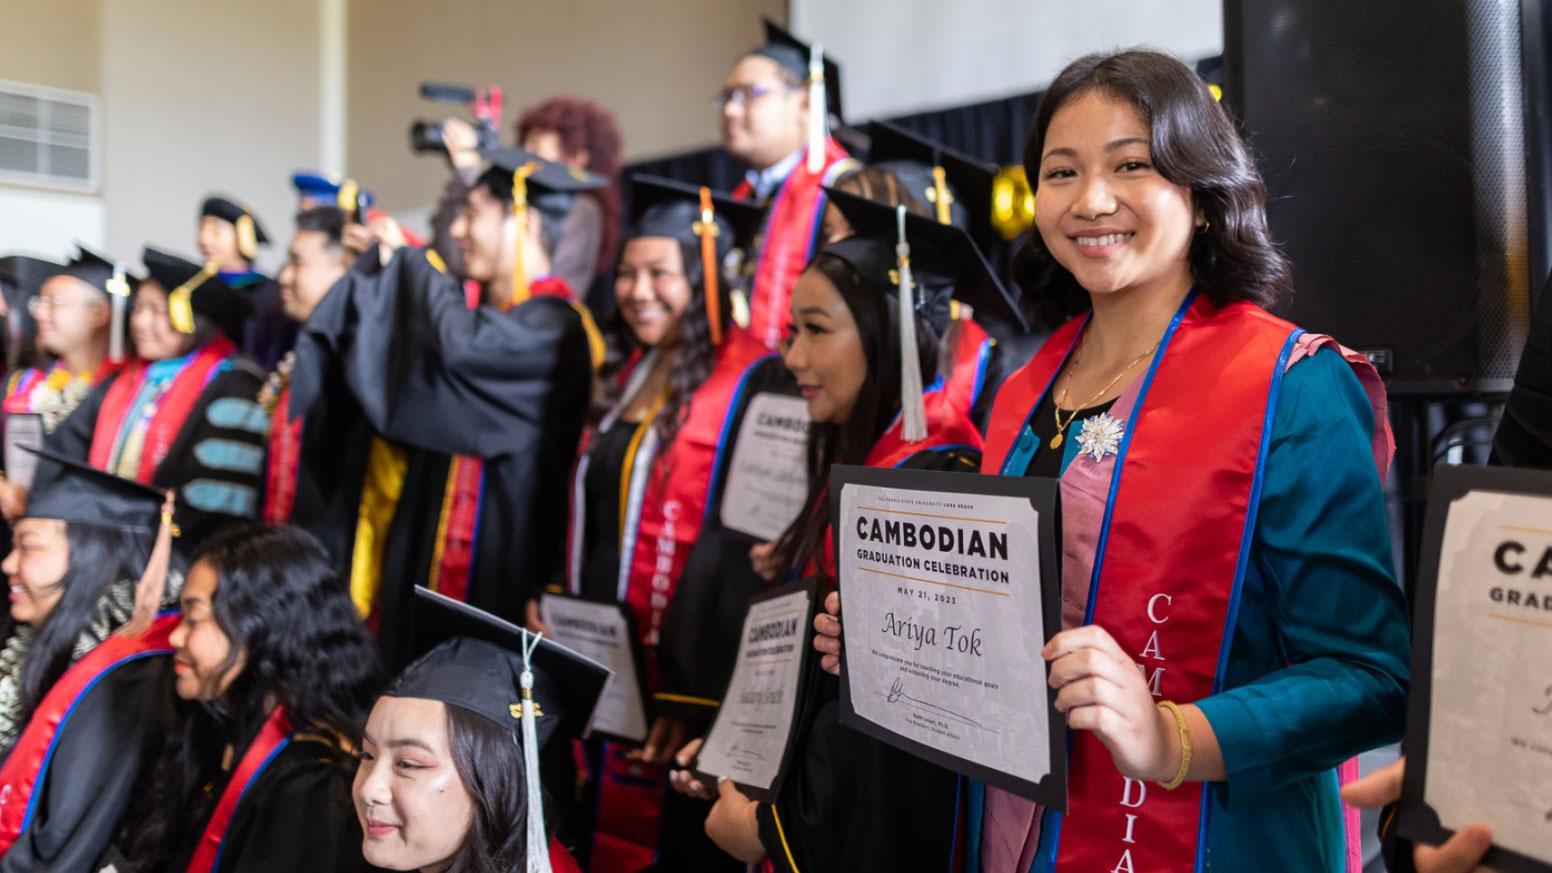 Ariya Tok poses with her fellow graduates after they received their certificates at a Cambodian cultural graduation ceremony at Cal State Long Beach.